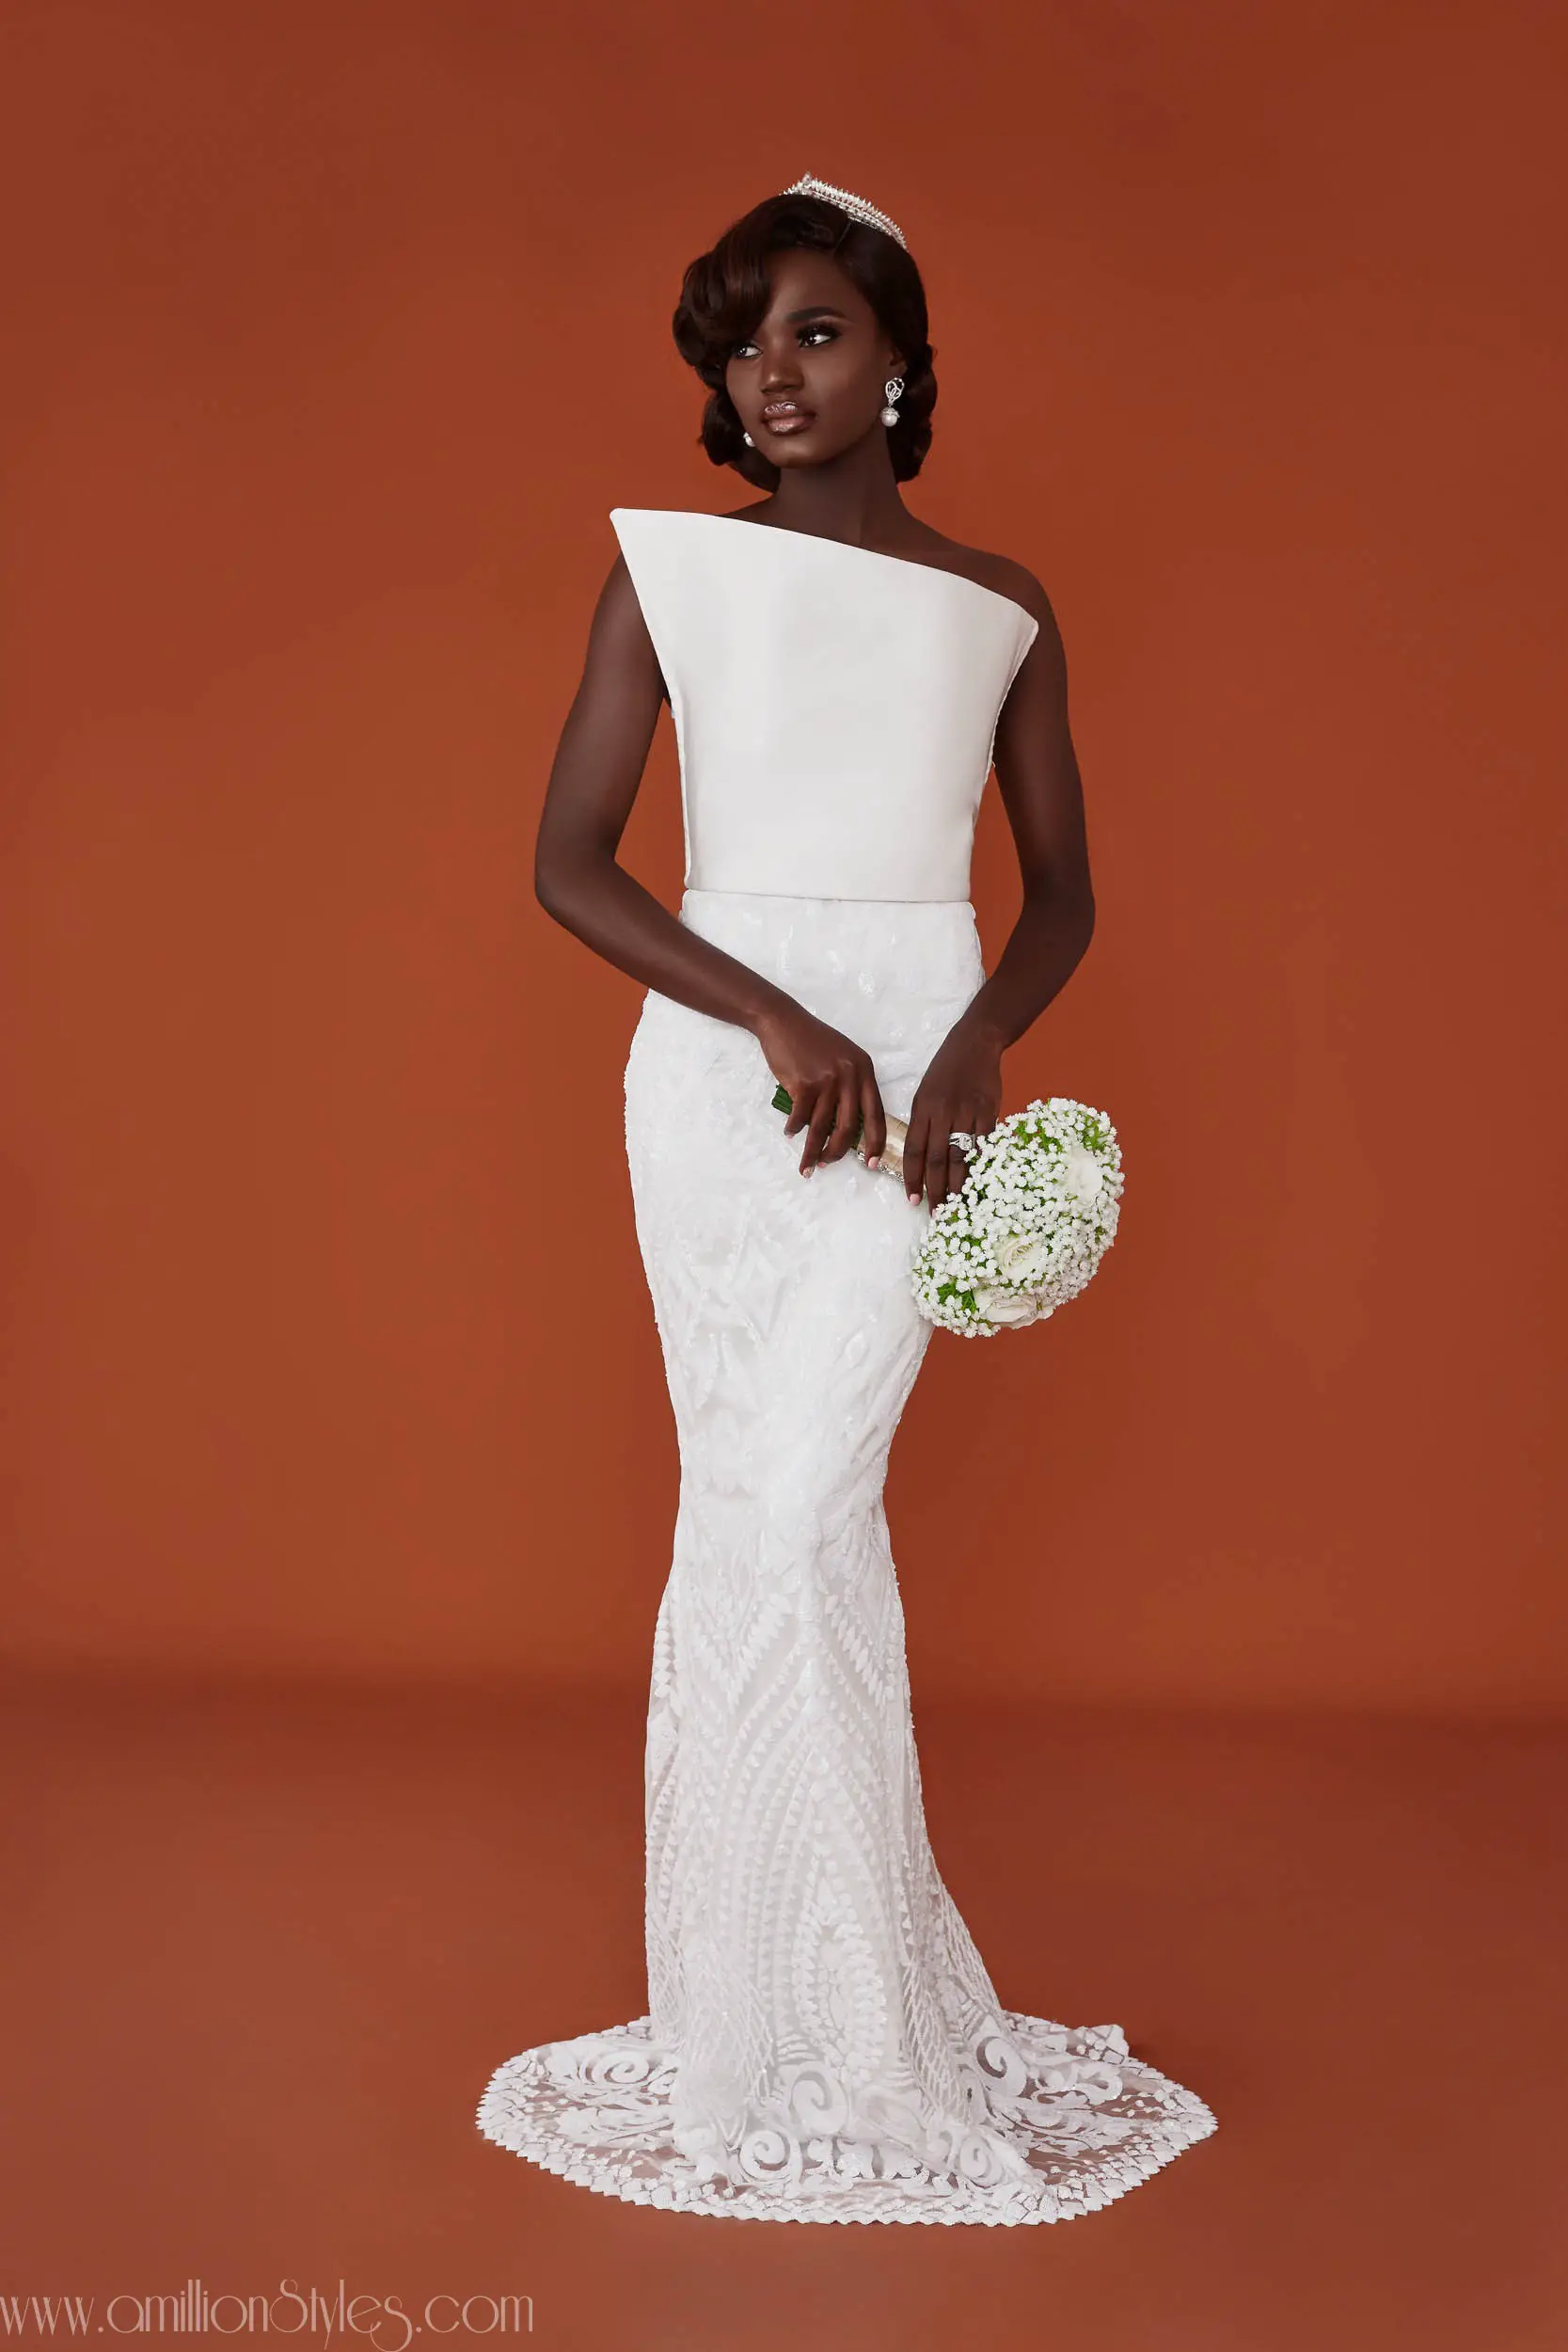 2020 Brides Are Going To Love Wana Sambo First-Ever Bridal Collection